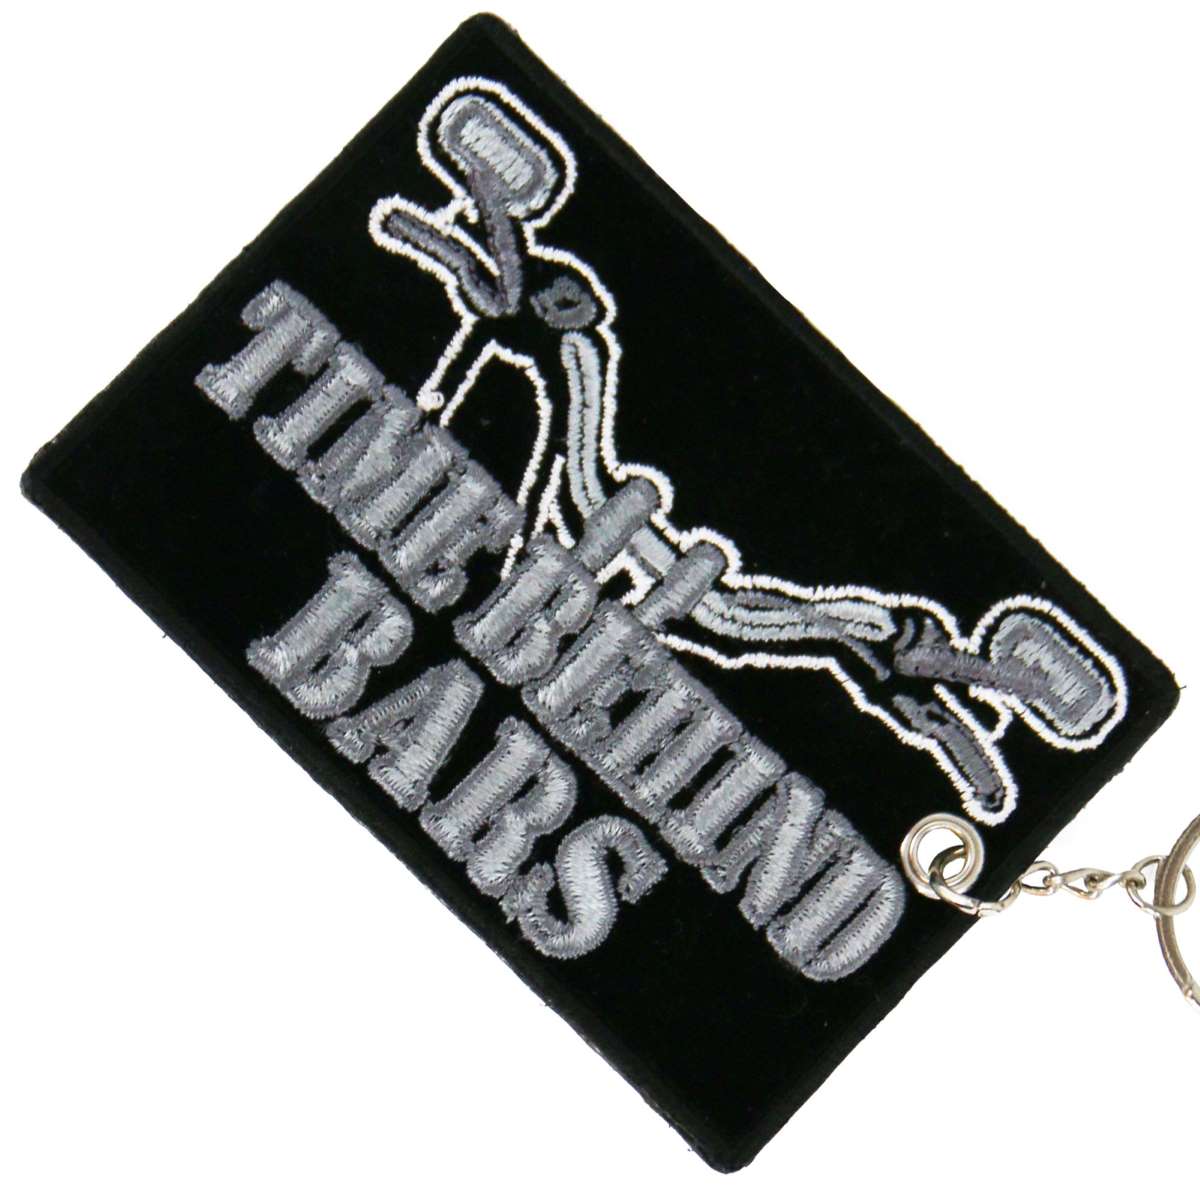 Hot Leathers Time Behind Bars Embroidered Key Chain KCH1028